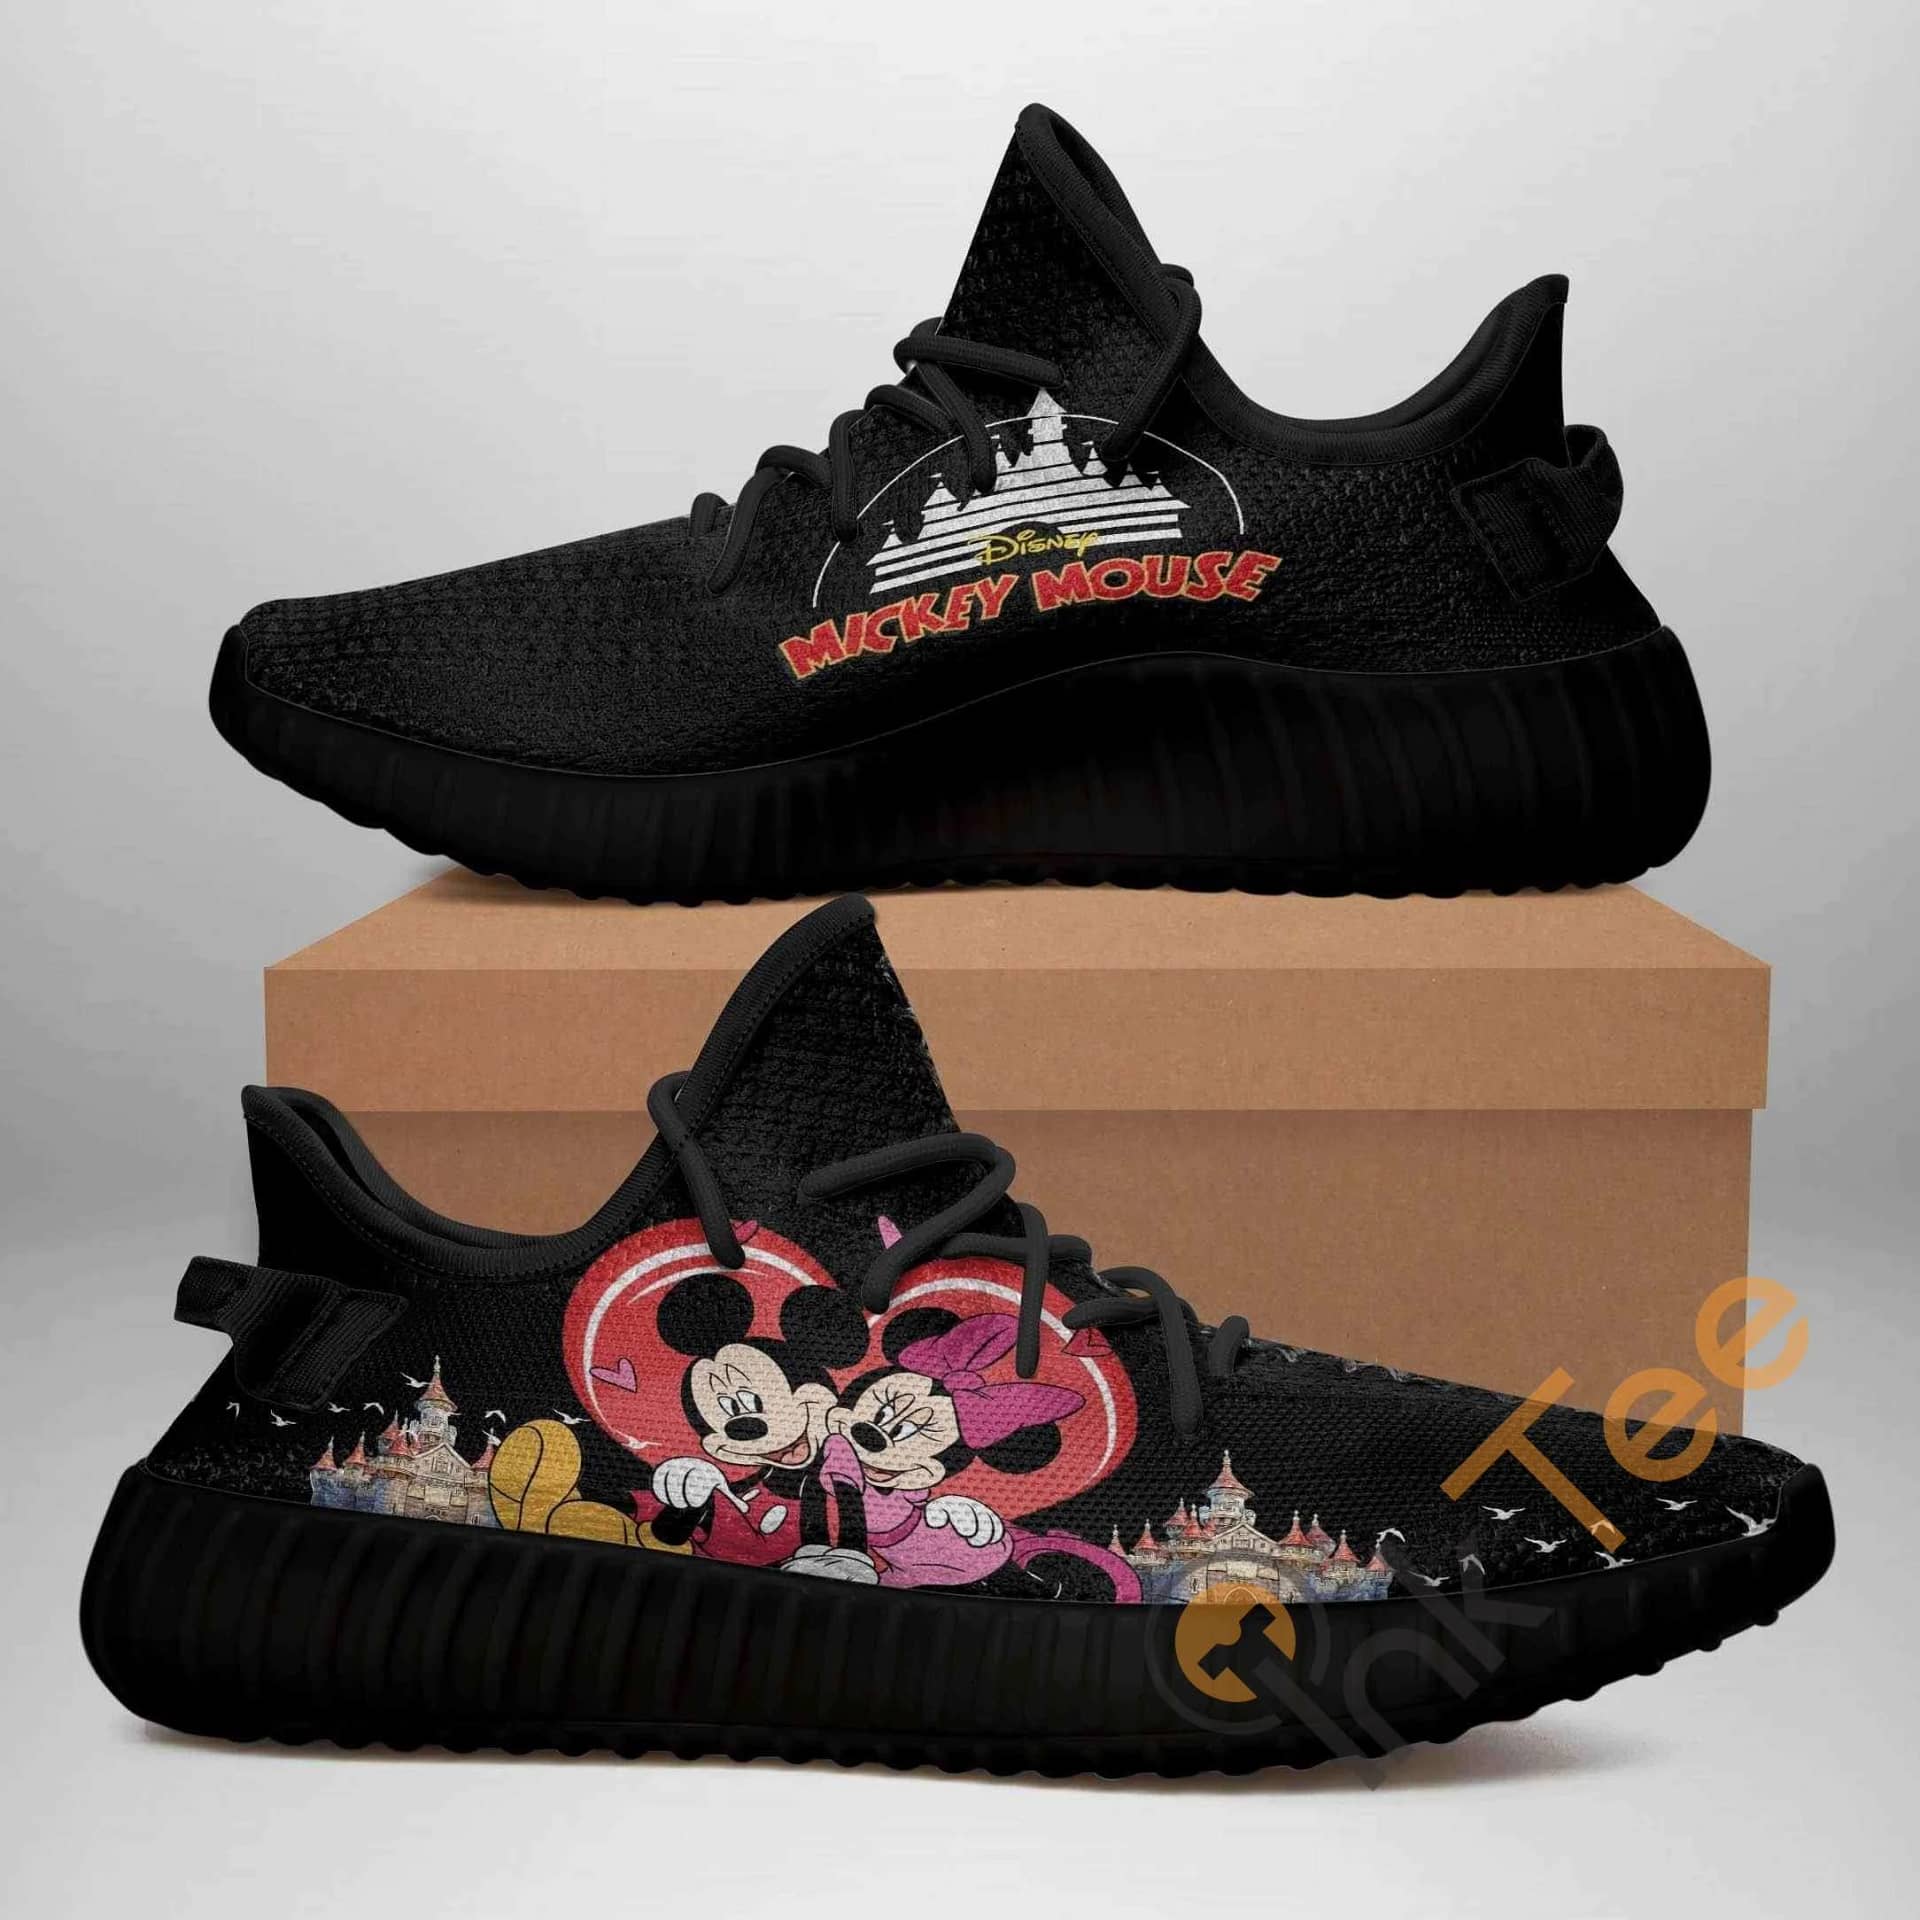 Mickey Mouse Amazon Best Selling Yeezy Boost